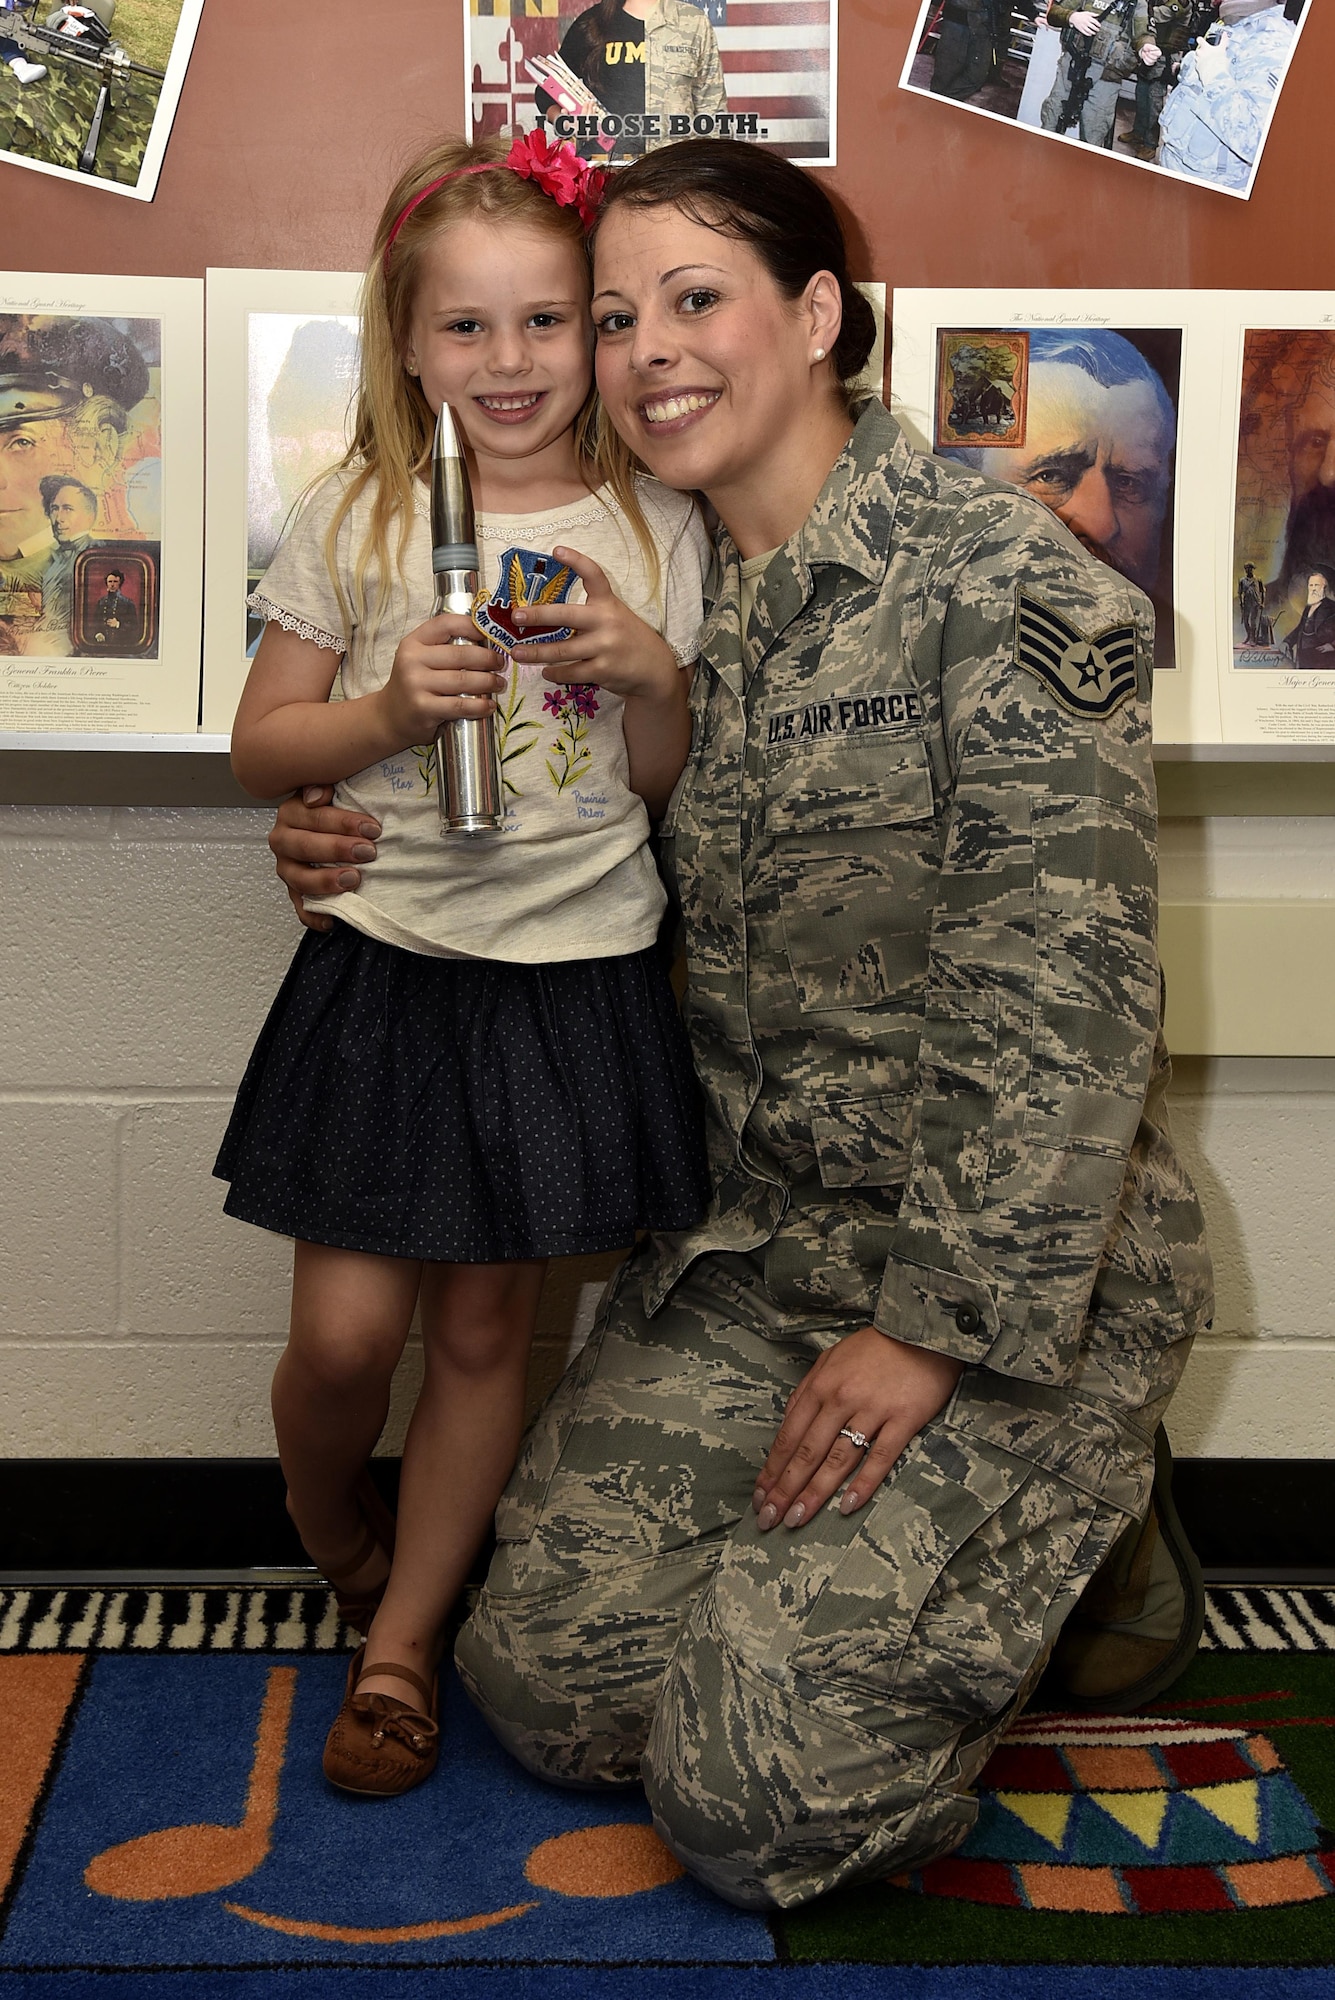 Air Force Staff Sgt. Miriam Y. Jarvis, 175th Force Support Squadron customer service NCO in charge, poses for a photo with her daughter, Avery, June 6, 2017, during a career day presentation at Oliver Beach Elementary School, Chase, Md. Jarvis was speaking to her daughter’s class and other classes about her job during career day. (U.S. Air National Guard photo by Airman Sarah M. McClanahan /Released)